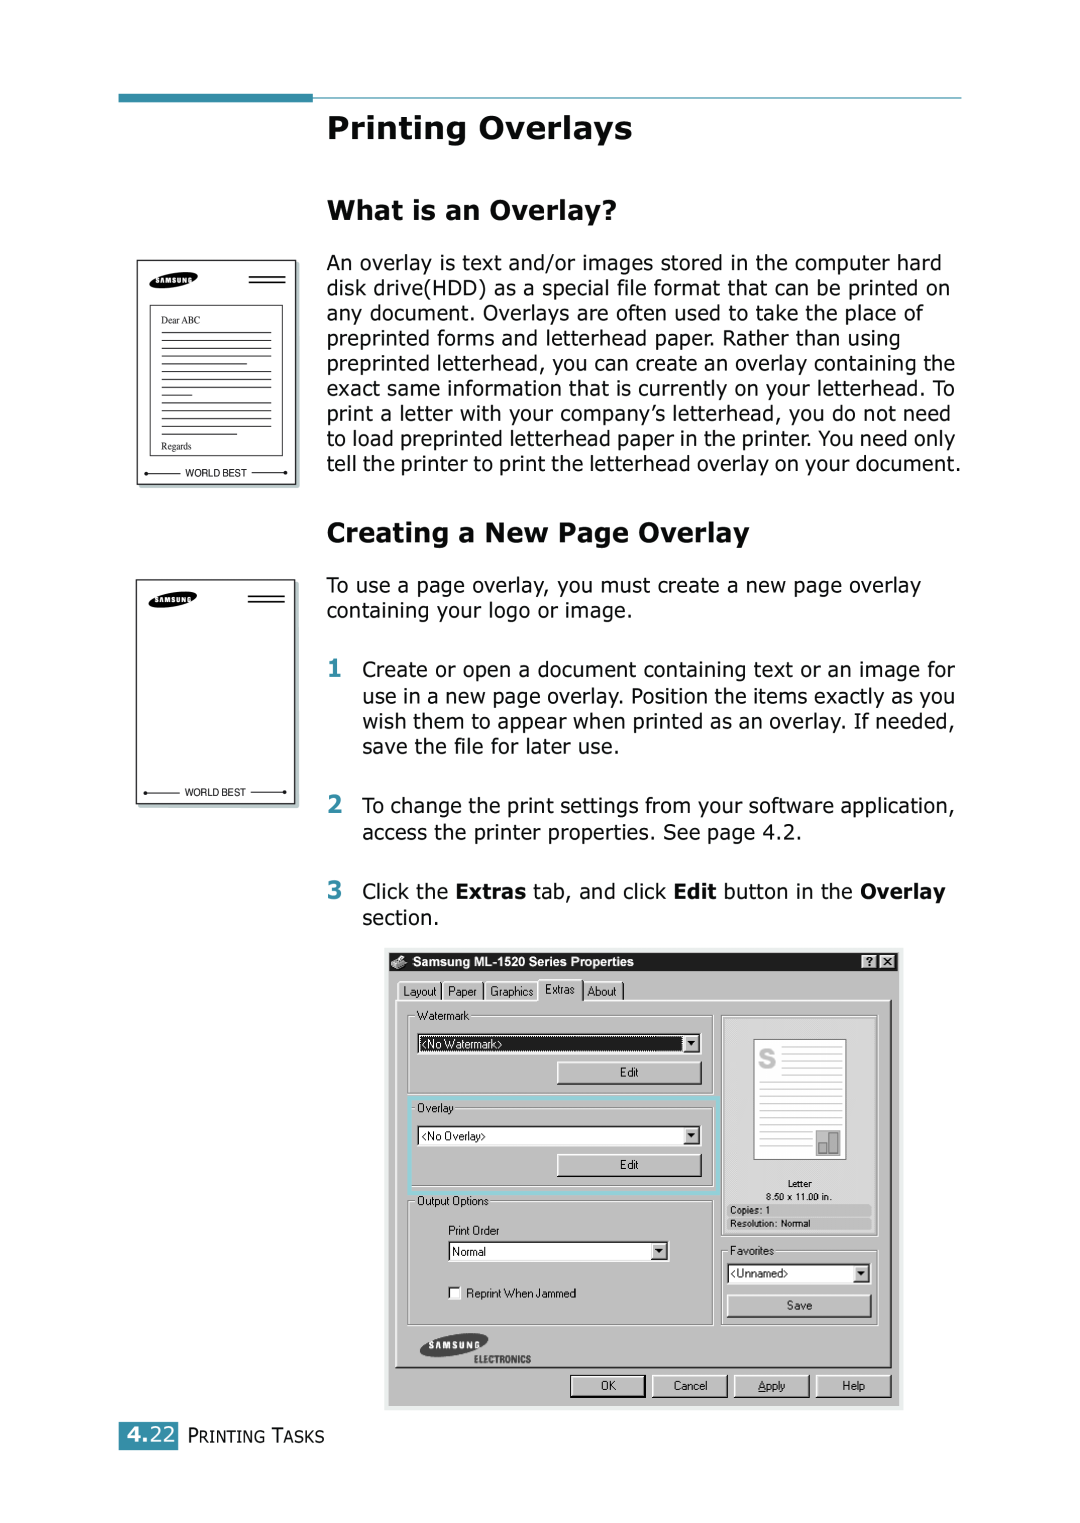 Samsung ML-1520 manual Printing Overlays, What is an Overlay?, Creating a New Page Overlay 